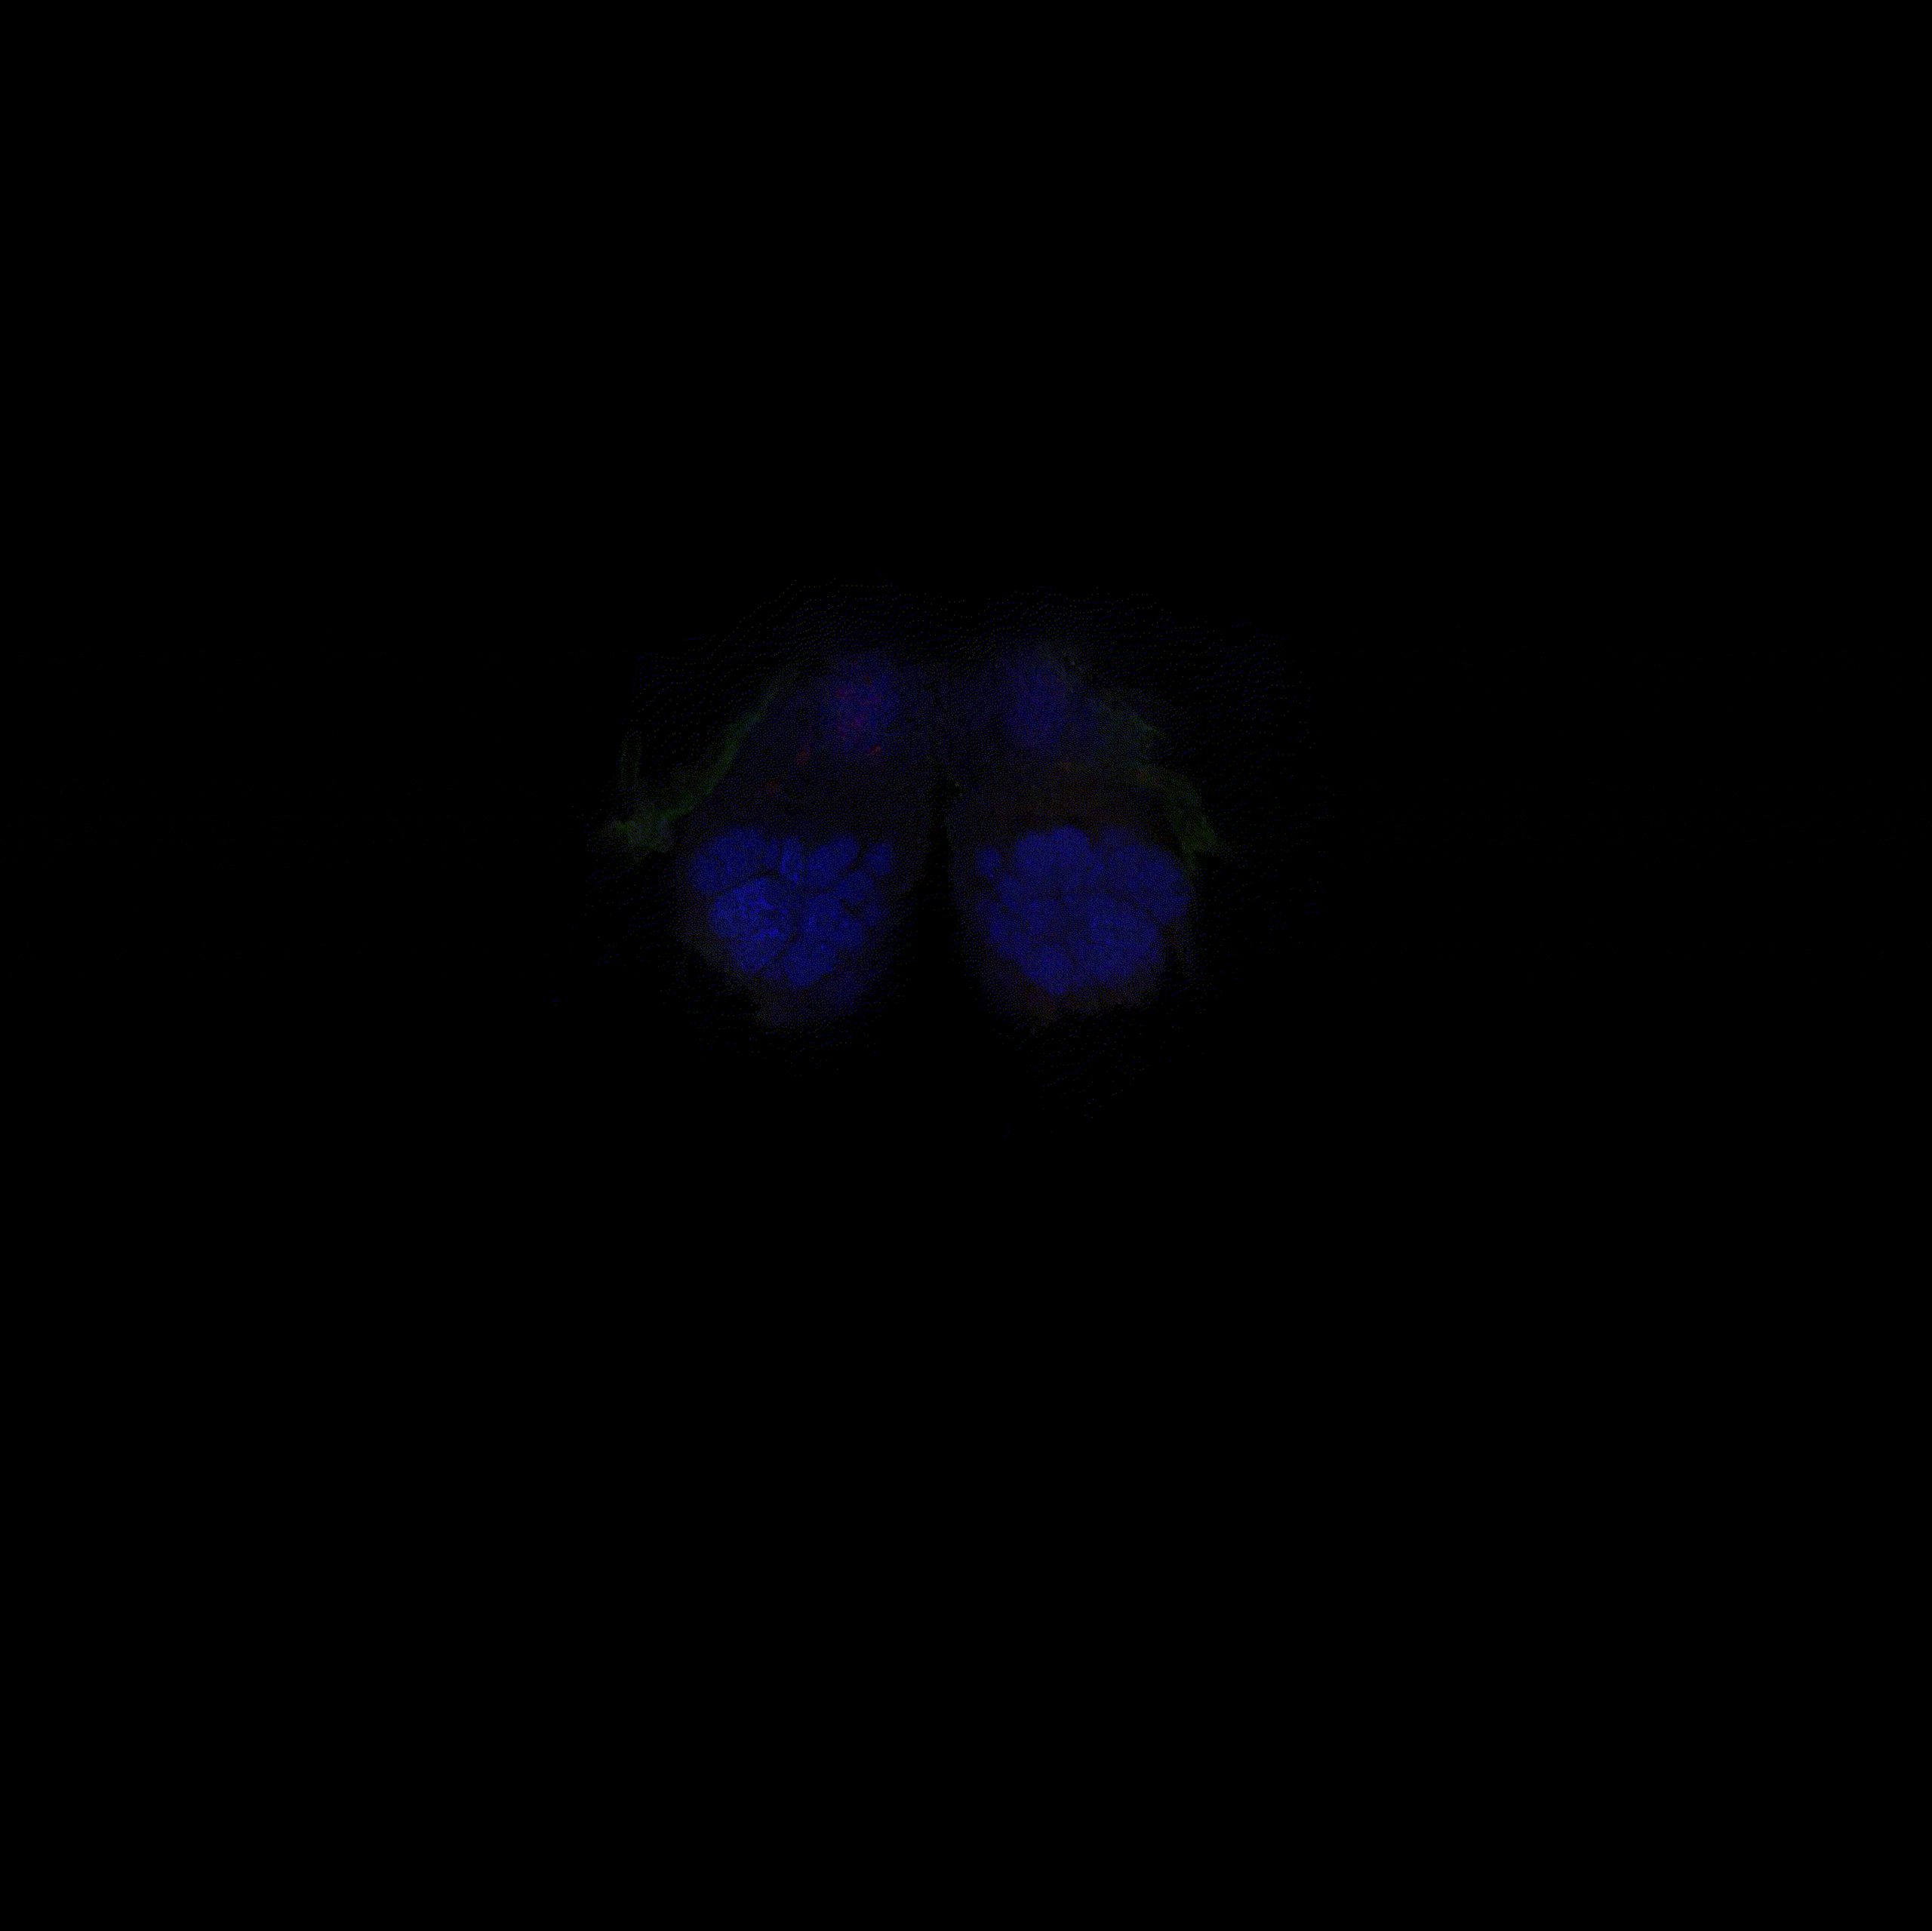 GIF of black square that gradually reveals flickering green and red swatches surrounded then swallowed by dark blue in a roughly oblong shape